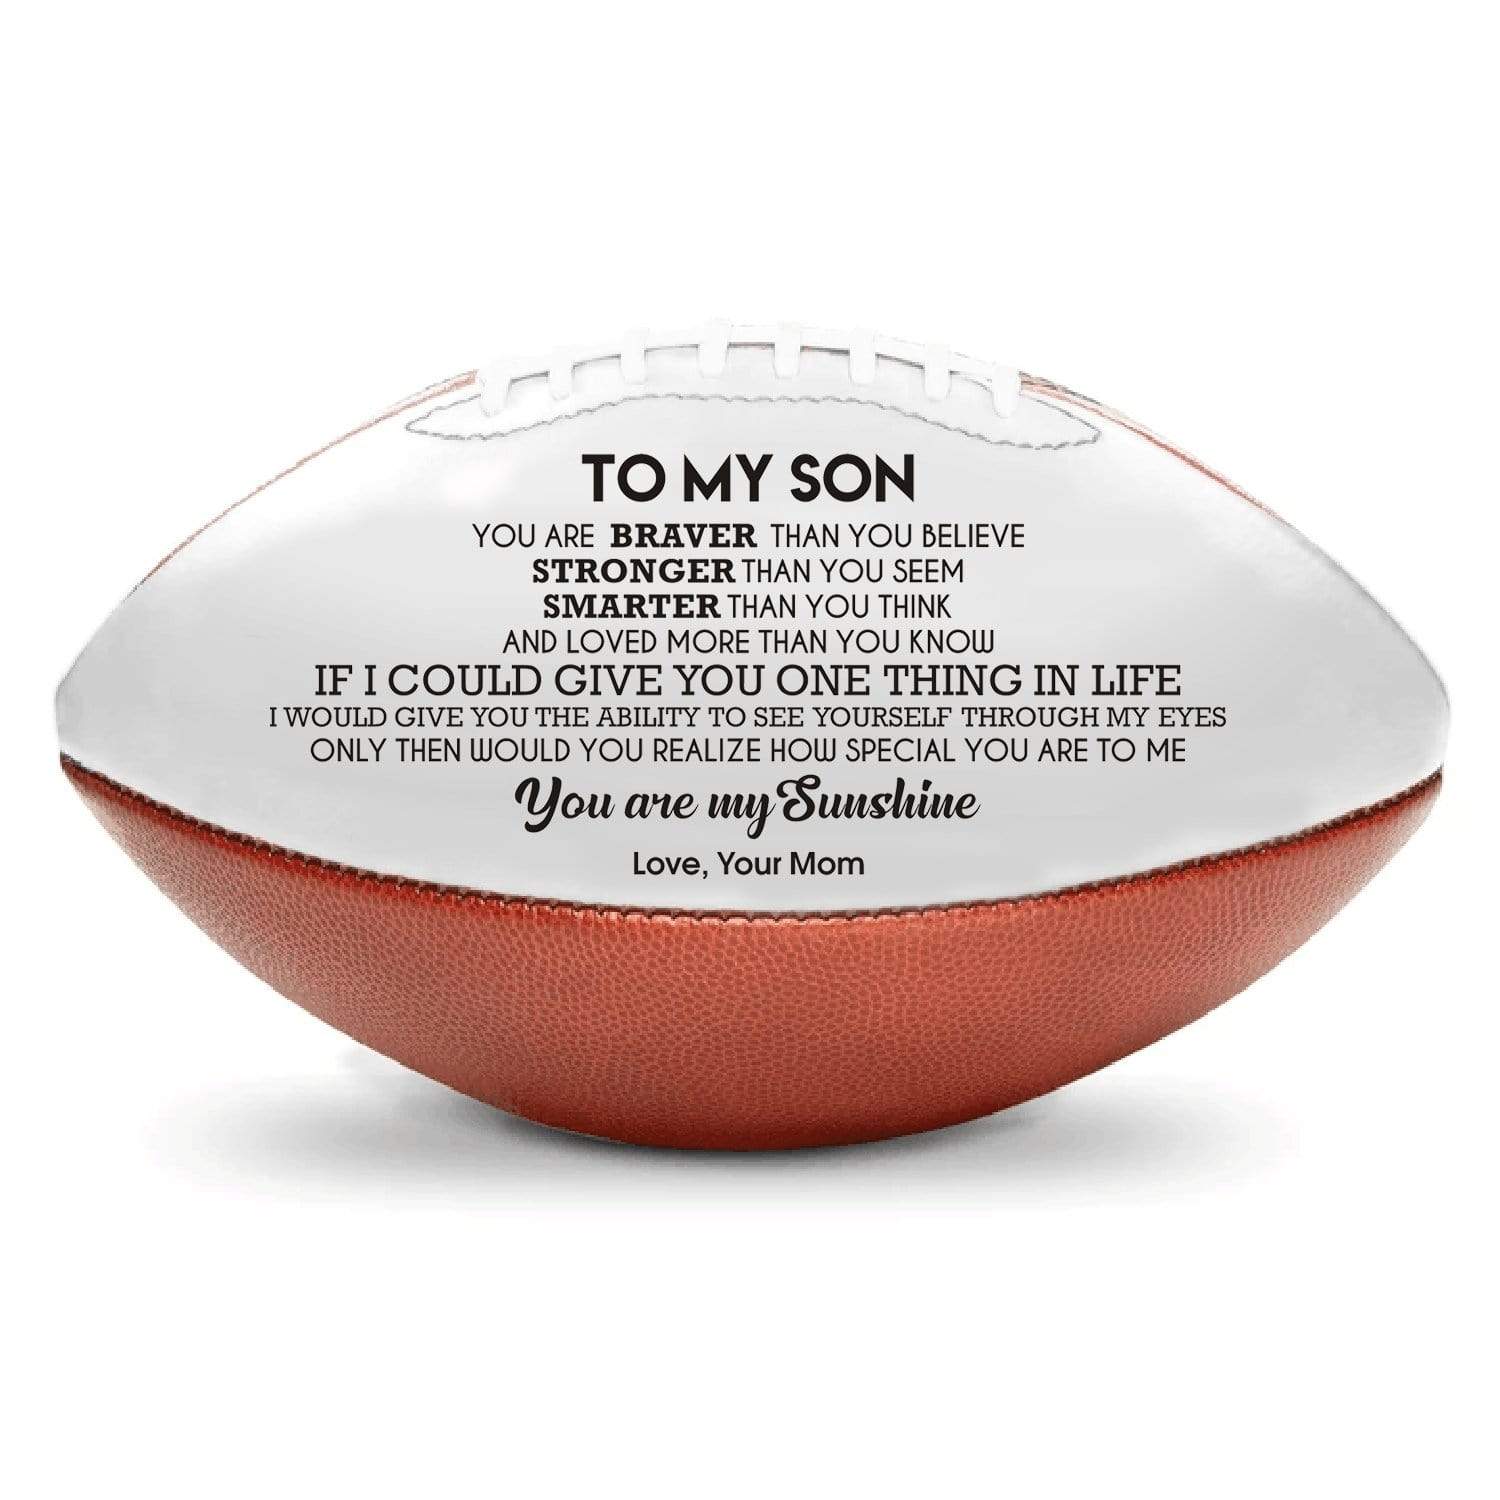 American Football Mom To Son - You Are My Sunshine Engraved American Football GiveMe-Gifts